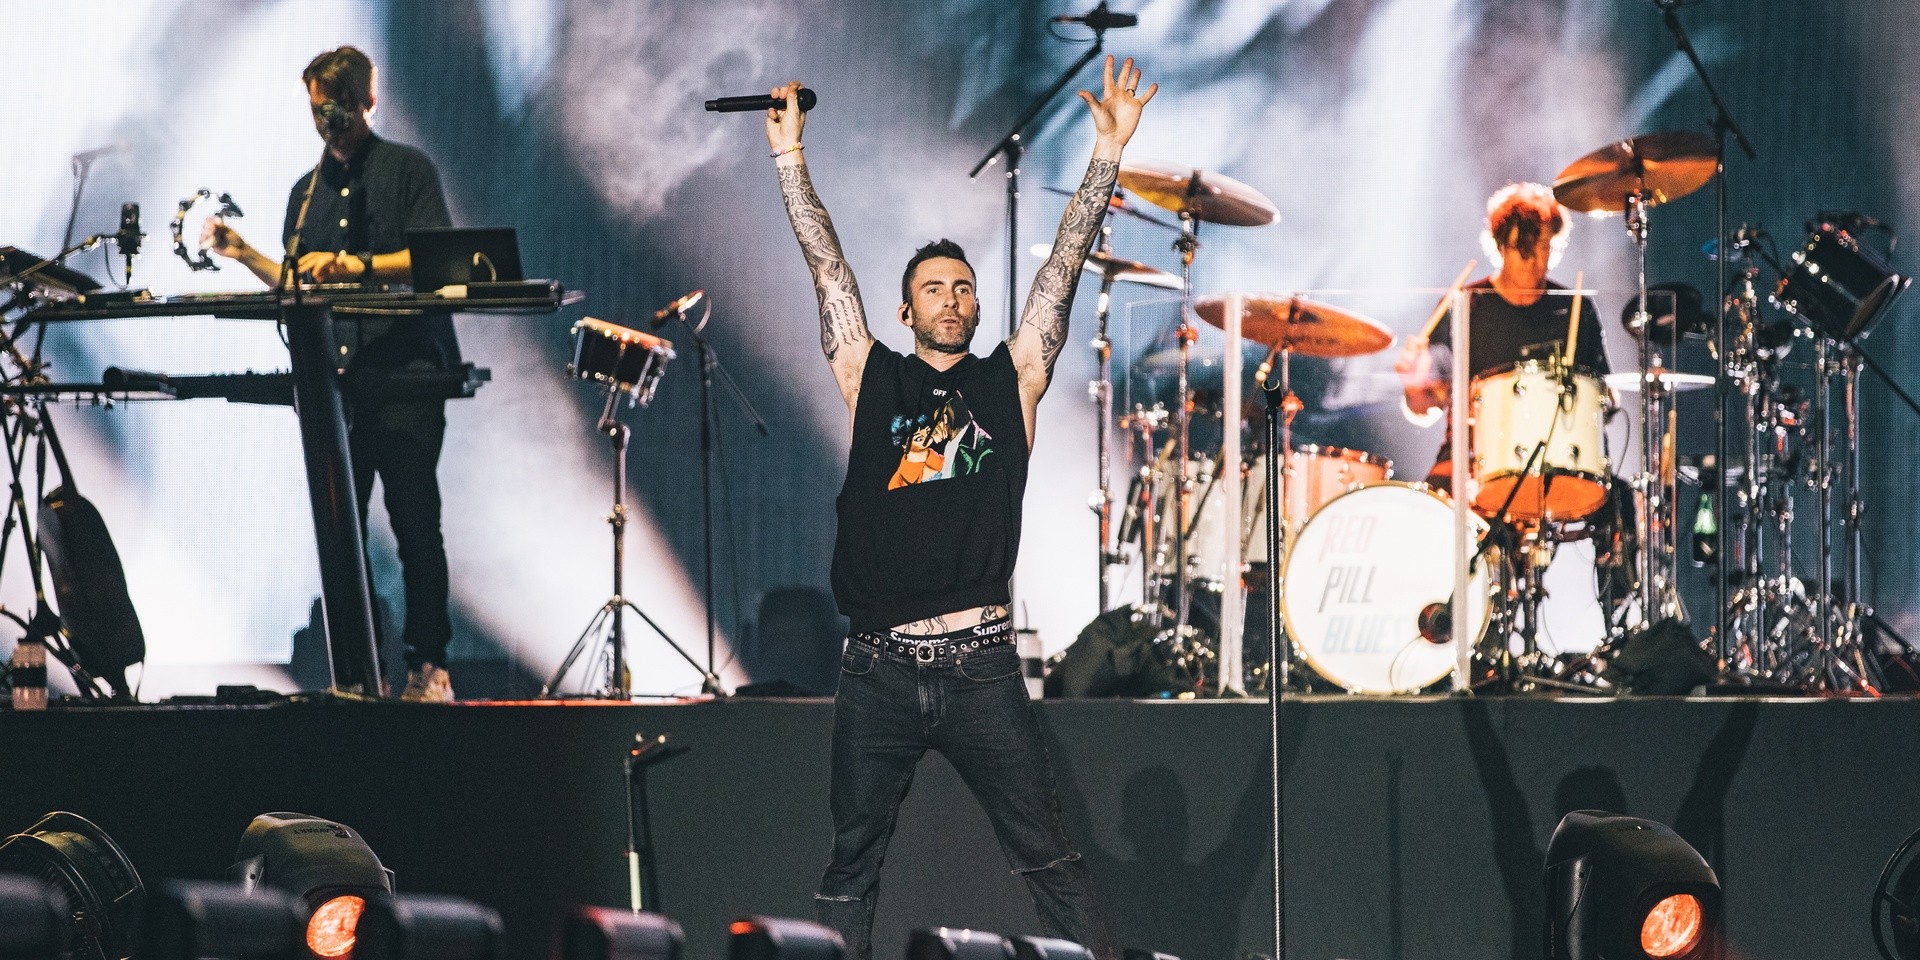 Maroon 5 proves why it's at the pinnacle of legendary status at Singapore show - gig report